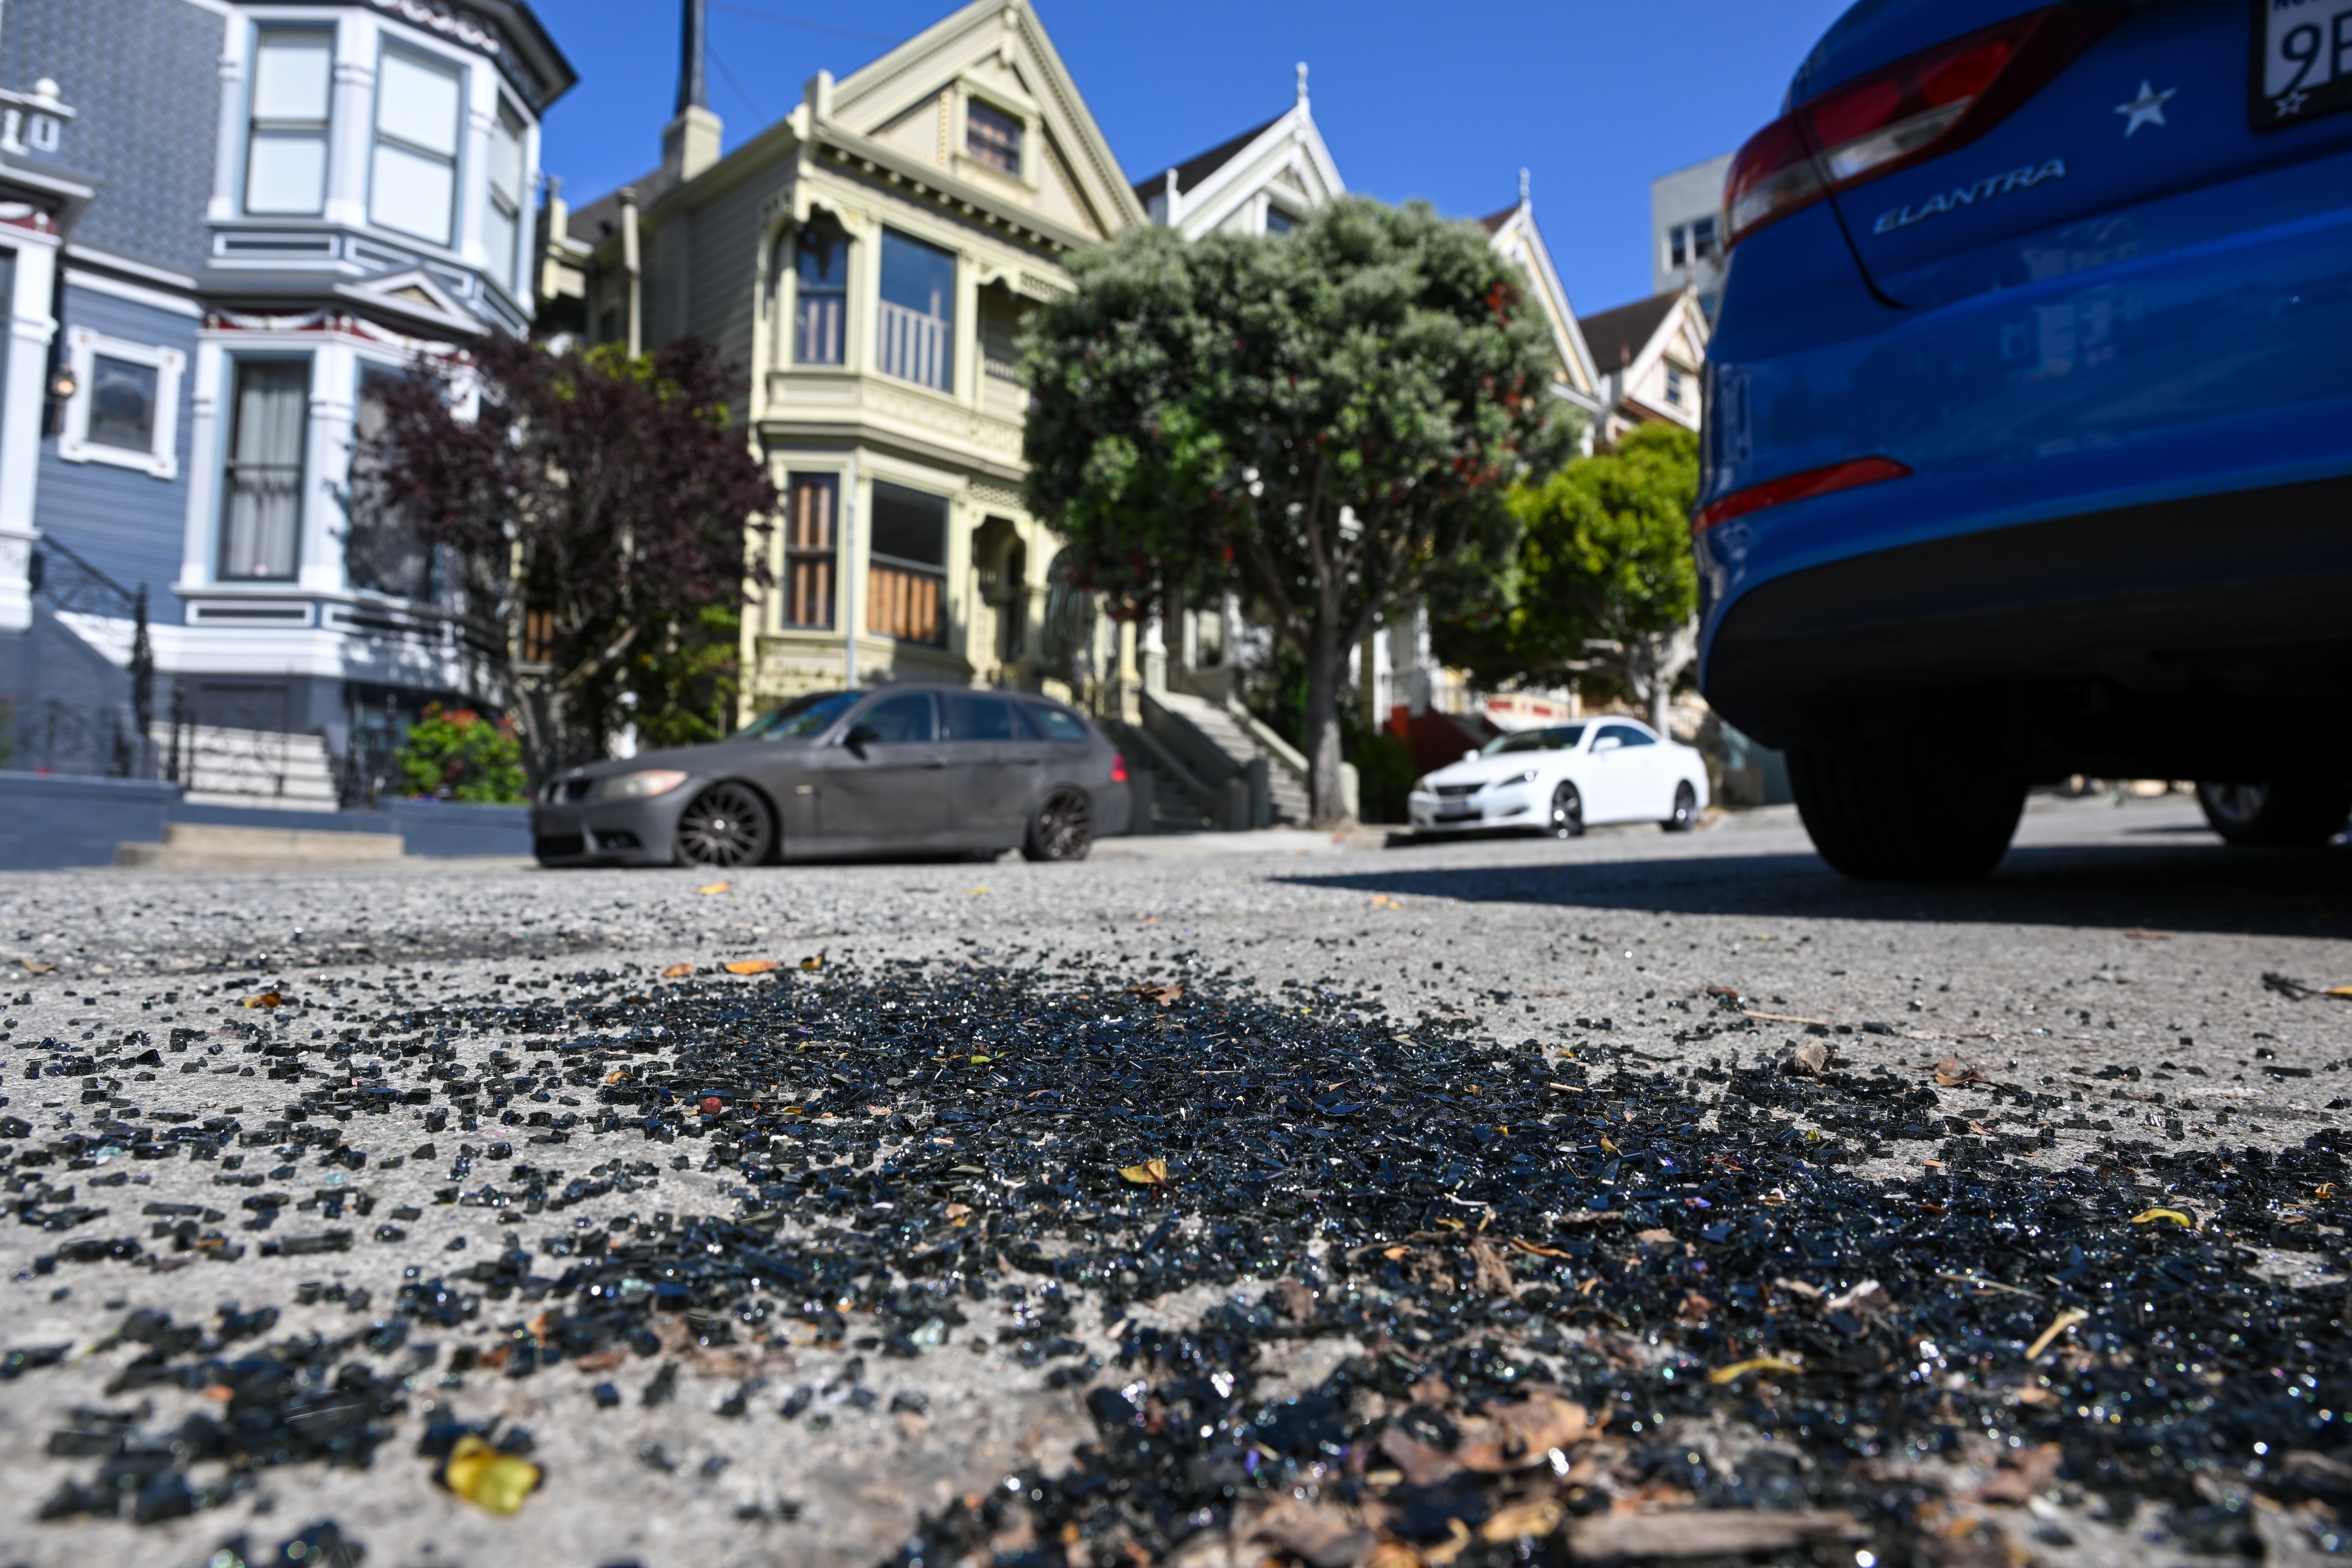 A close-up view of broken glass on a street, with out-of-focus cars and Victorian houses on a steep hill in the background.